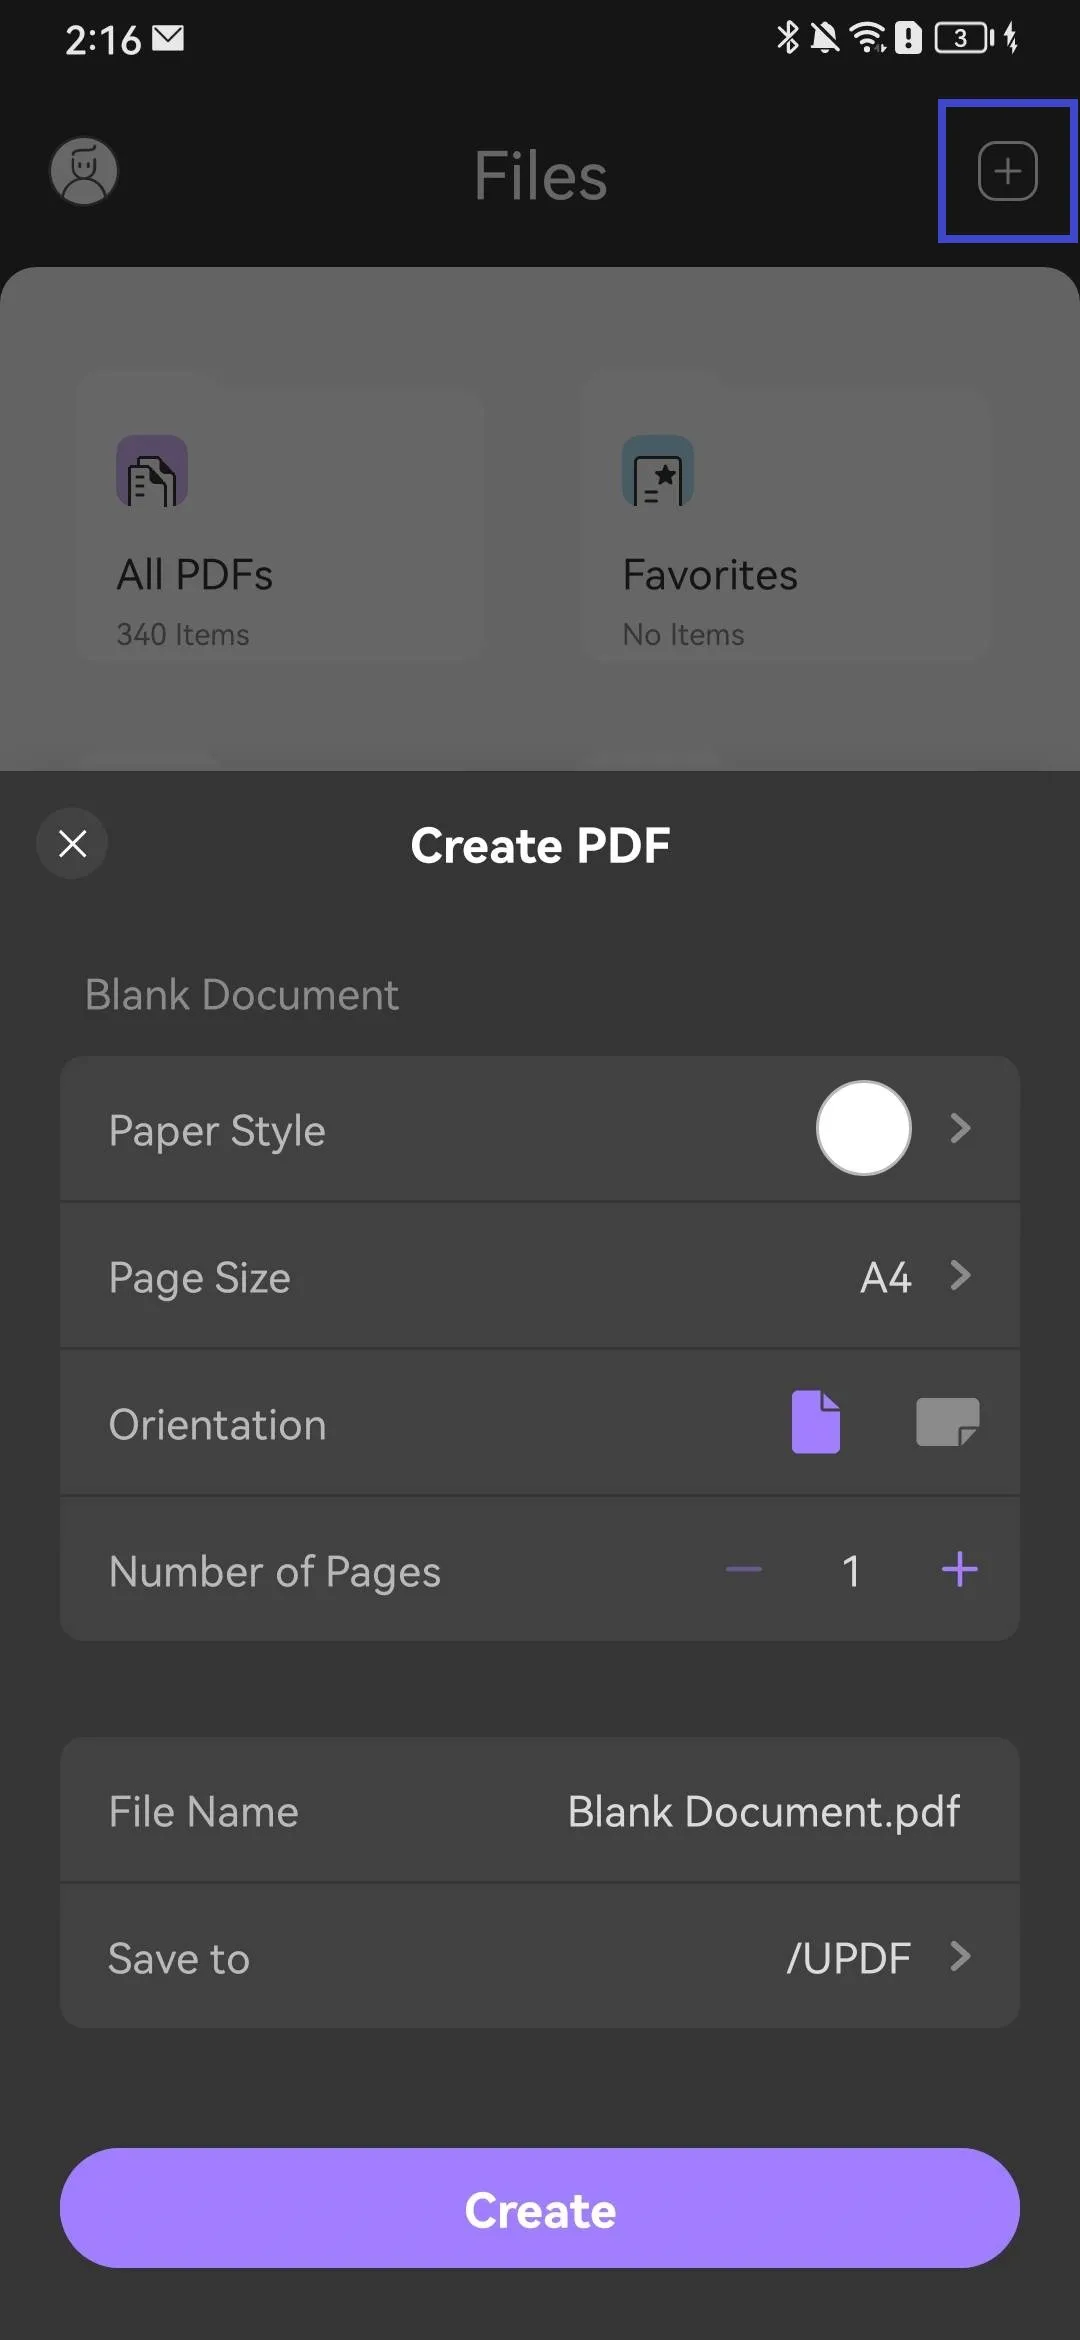 Create blank pdf with UPDF Android